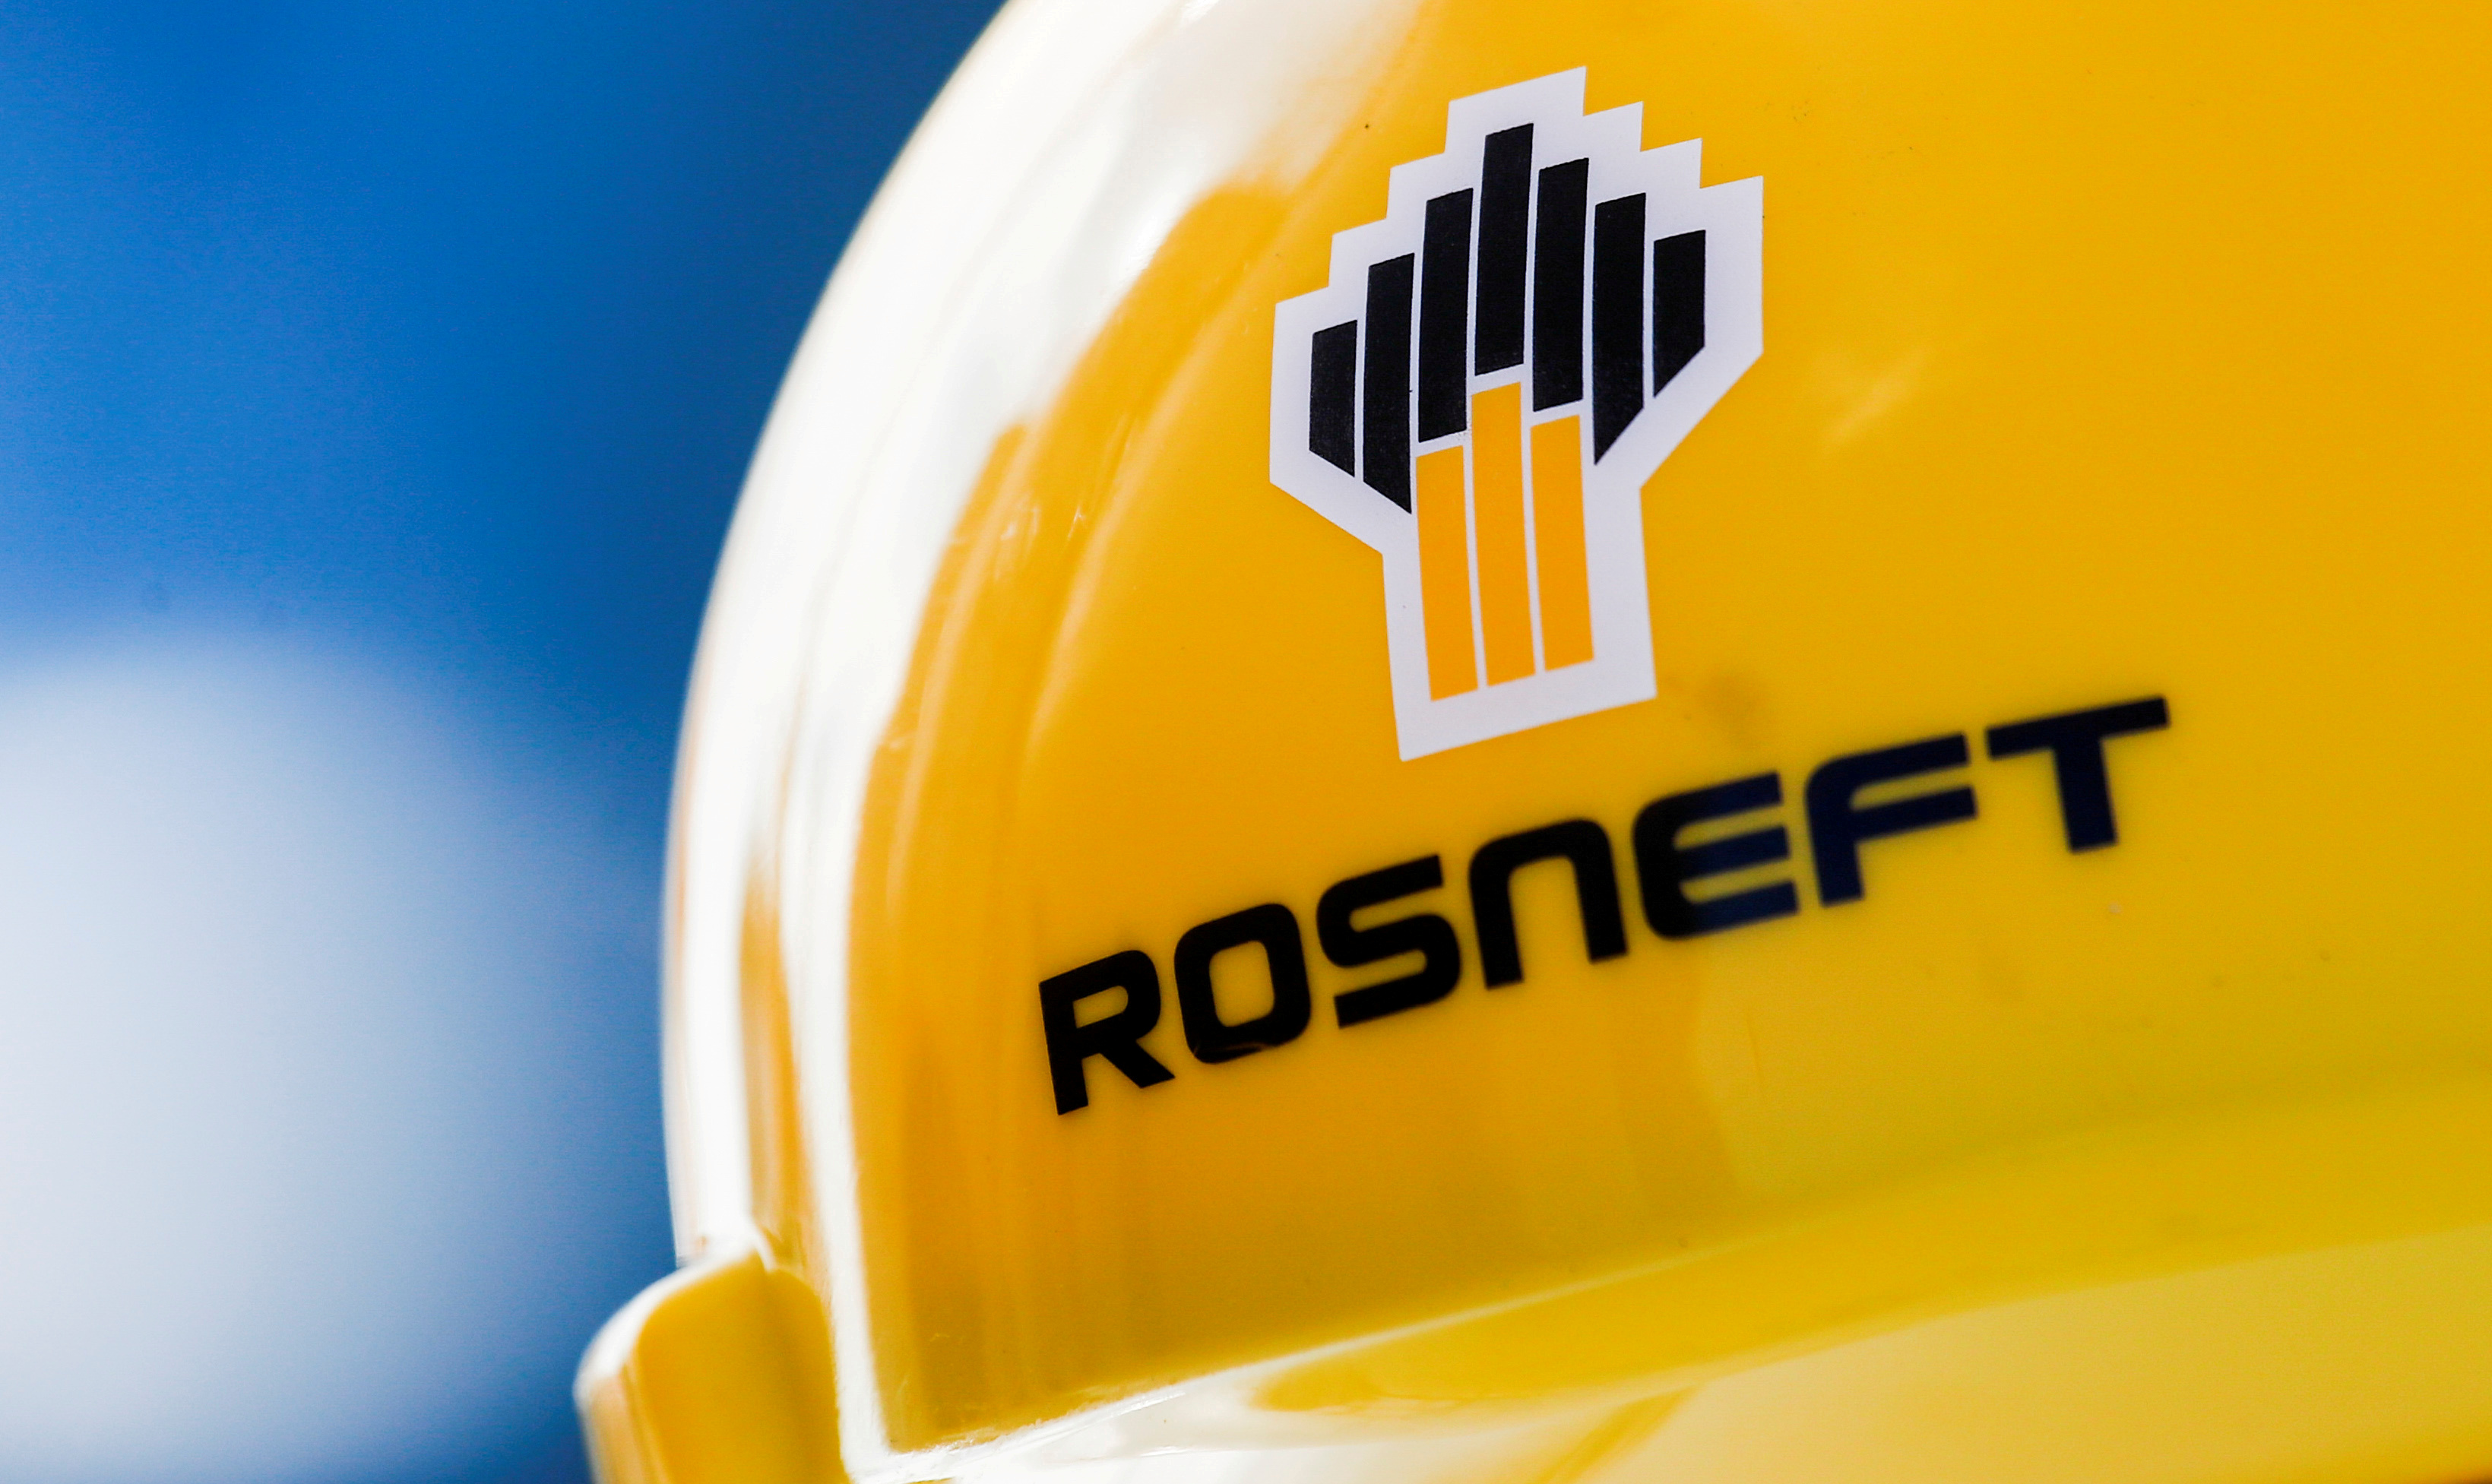 The Rosneft logo is pictured on a safety helmet in Vung Tau, Vietnam April 27, 2018. Picture taken April 27, 2018. REUTERS/Maxim Shemetov